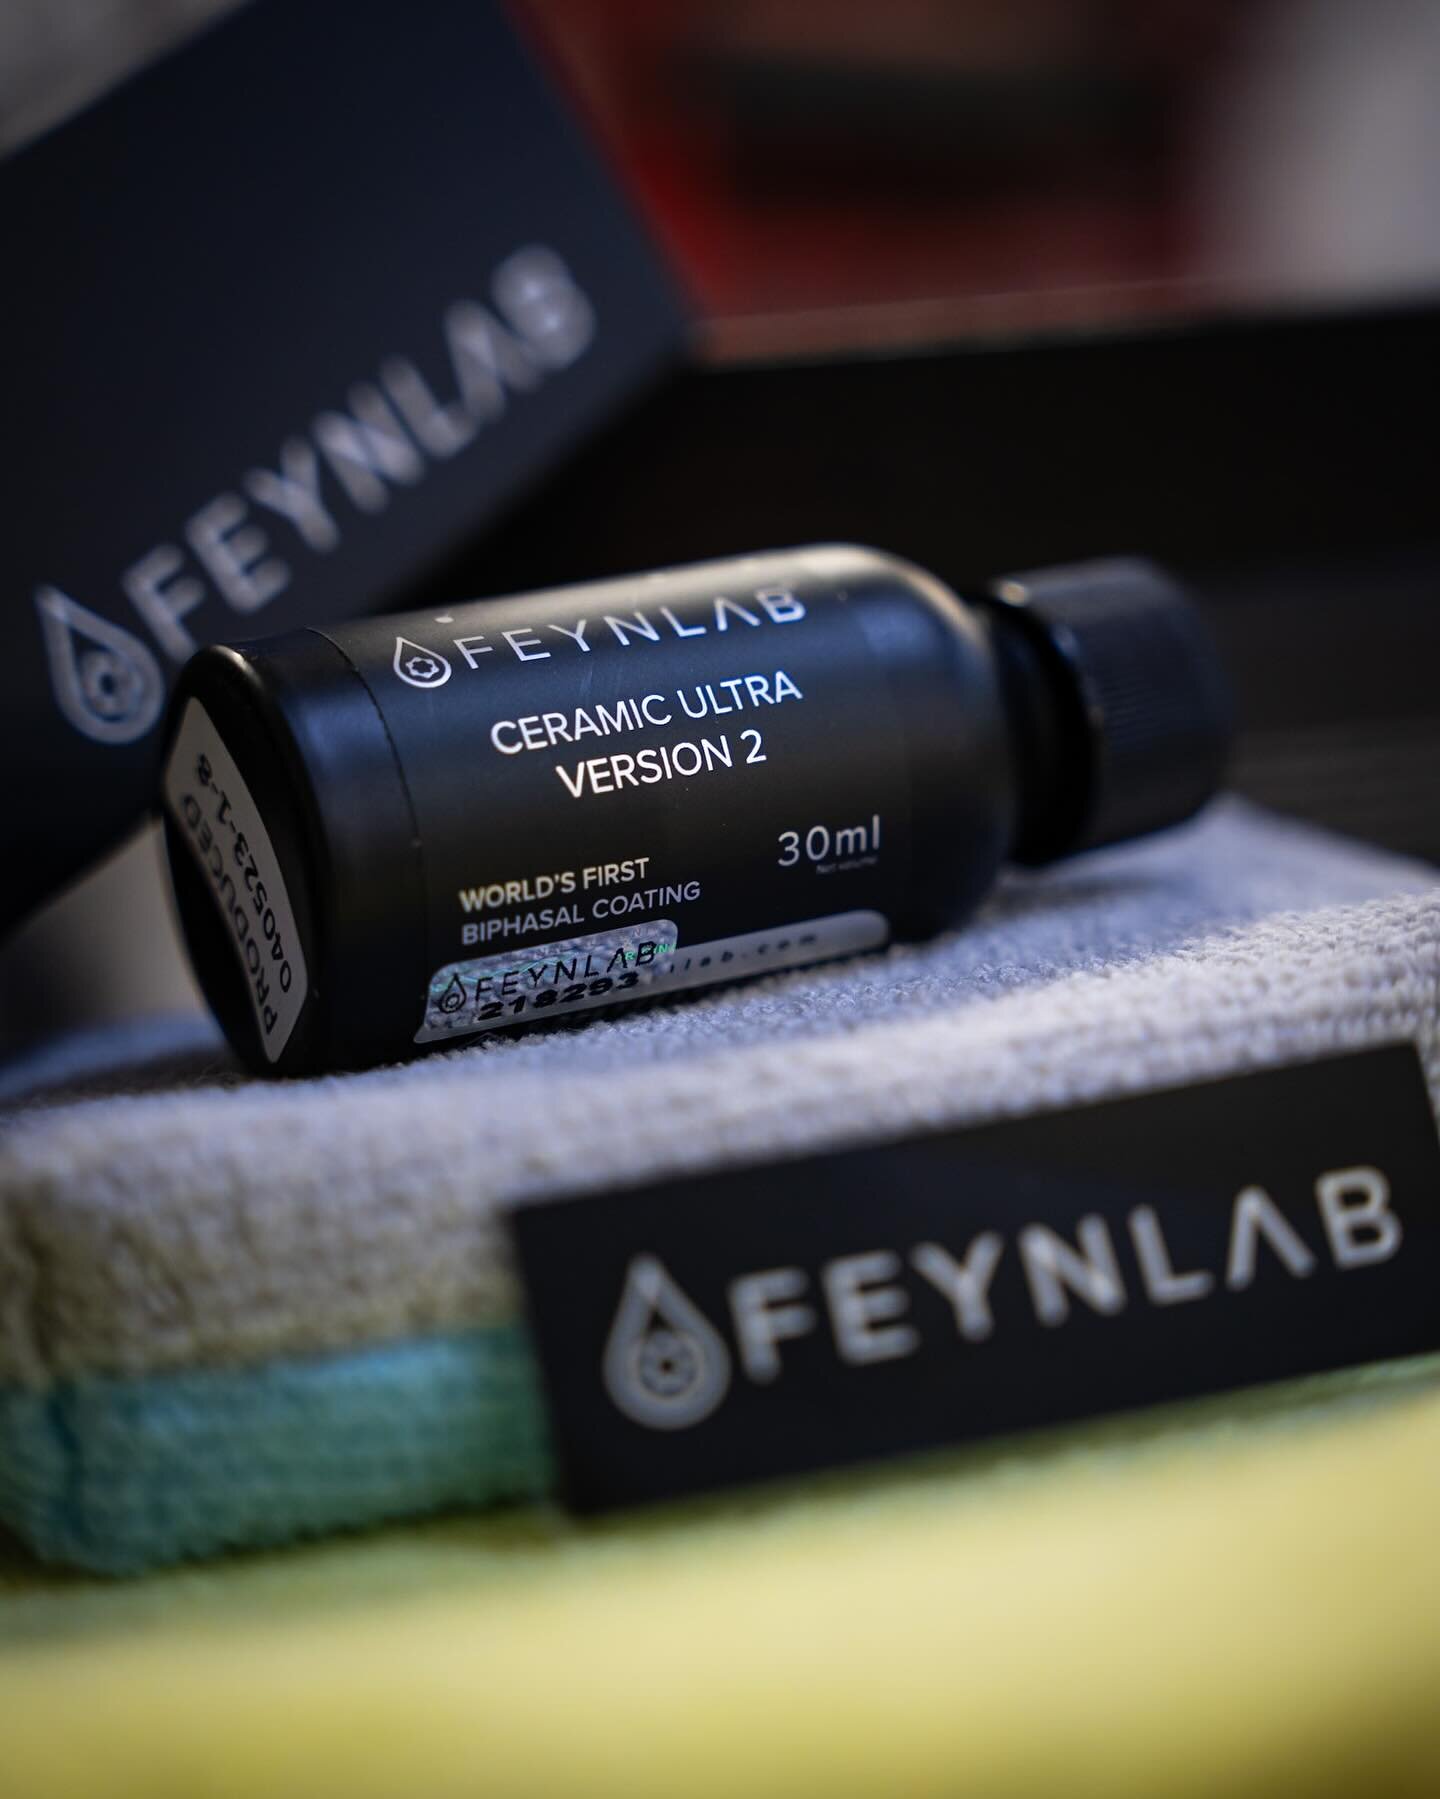 Feynlab Ceramic Ultra V2 Is Rated To Last A Minimum Of 5 Years ✅

This Multiphase Ceramic Coating Intensifies Gloss, Creates An Hydrophobic Surface And Prevents Chemical/UV Damages 💎🛡️

There Are Far More Benefits To The Properties Of These Coating